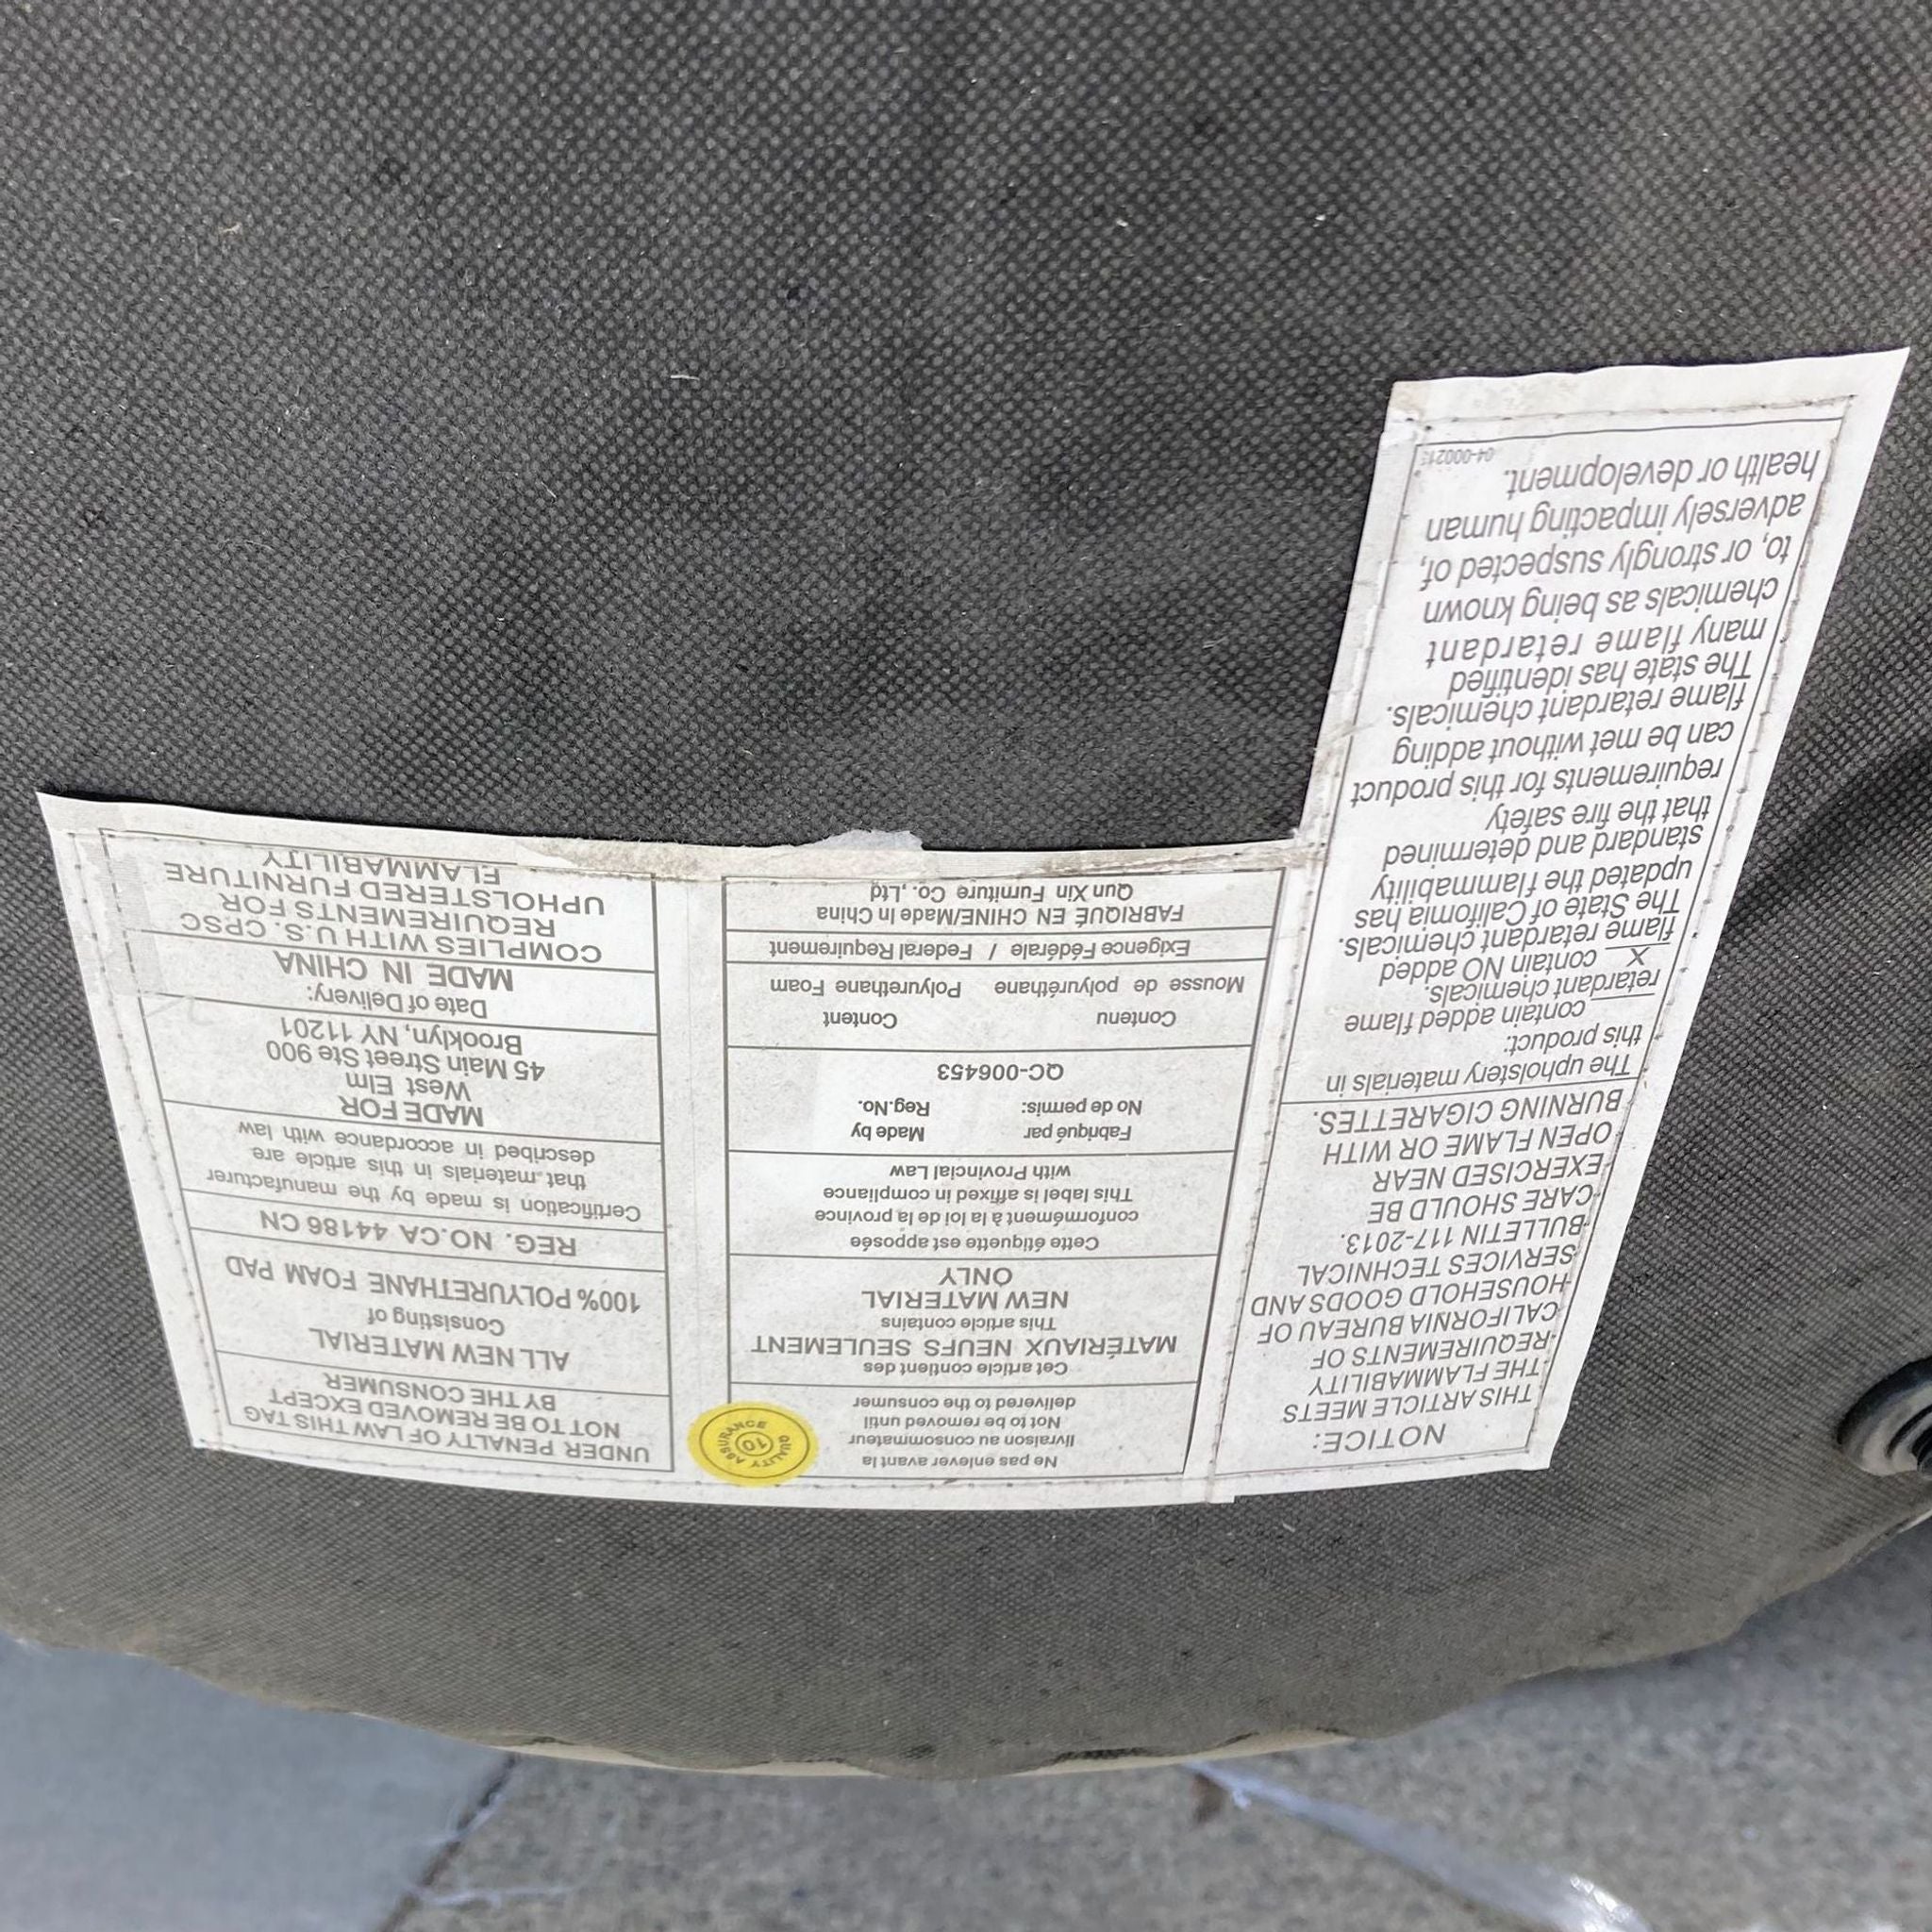 3. "Underneath view of the Slope dining chair by West Elm, showing the care label and black textile bottom cover."